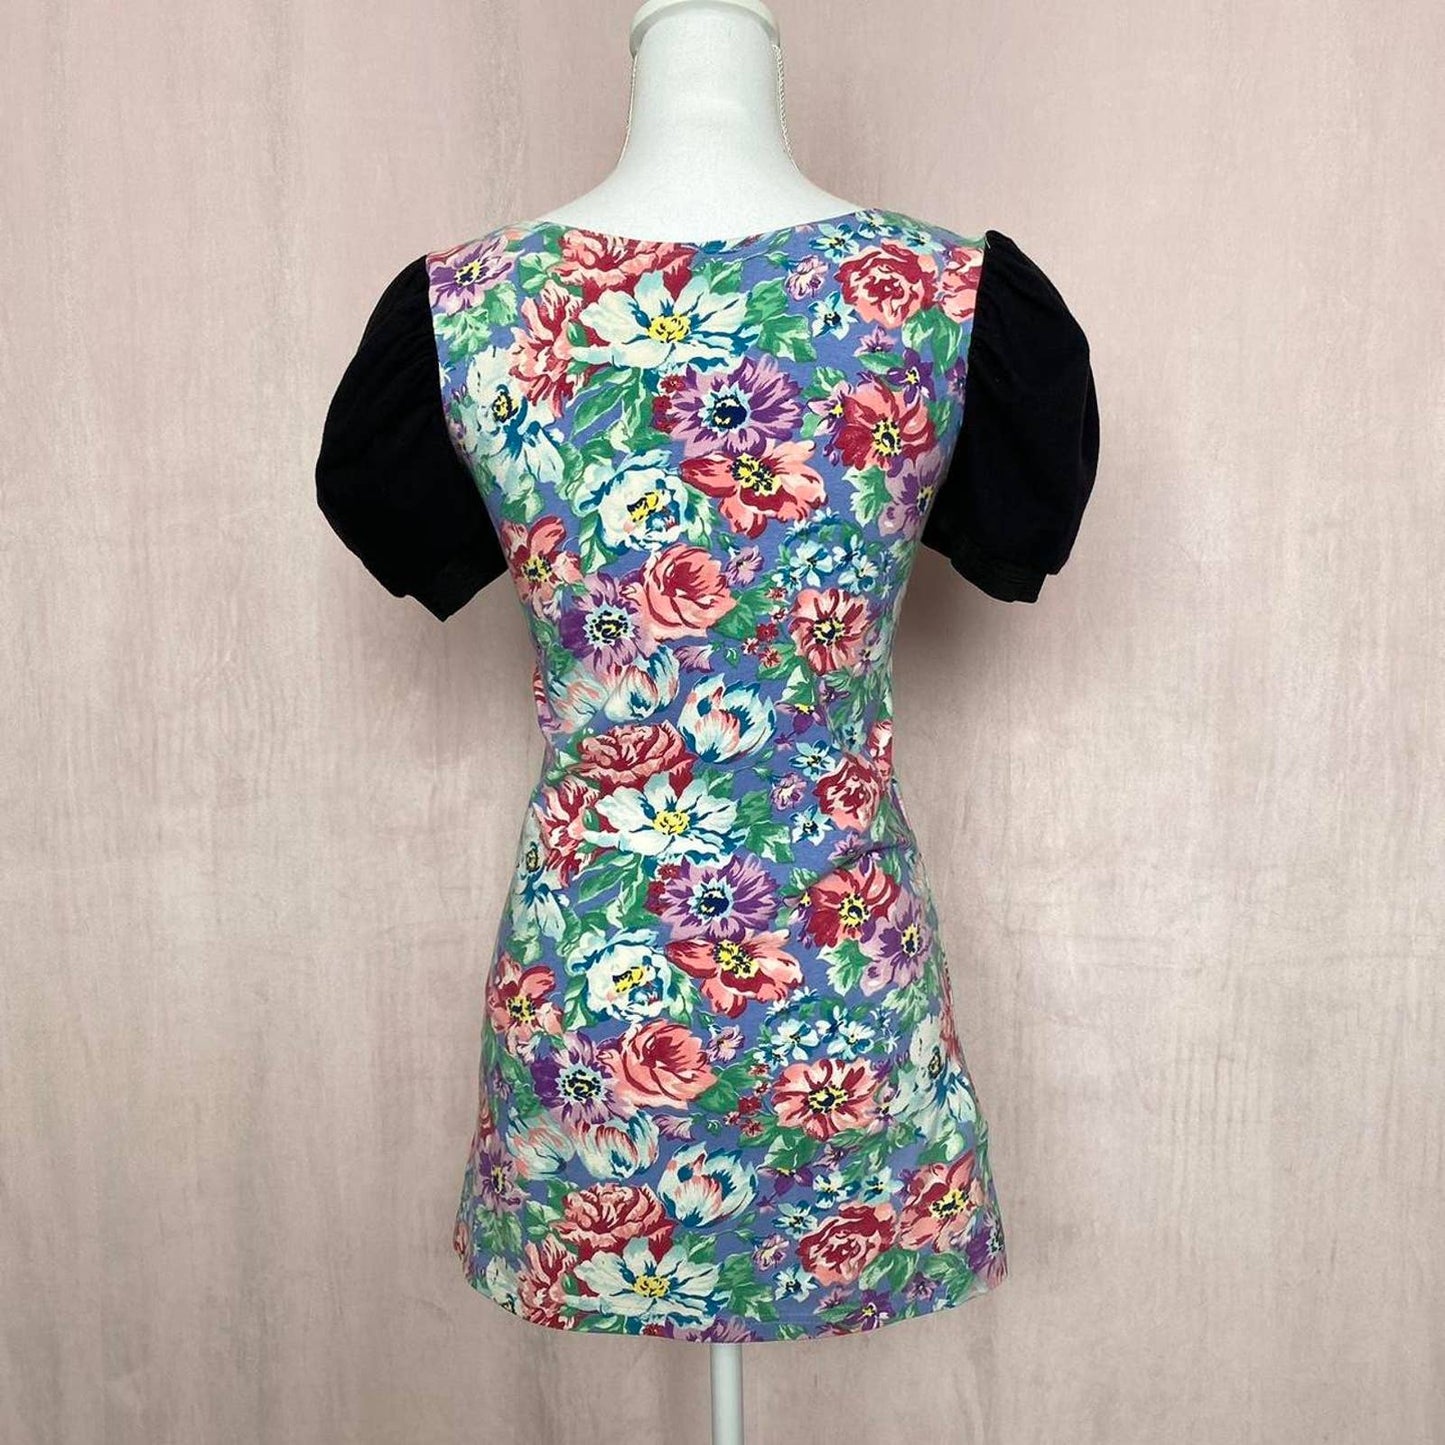 Secondhand New York Couture Floral Puff Sleeve Mini Dress, Size Small